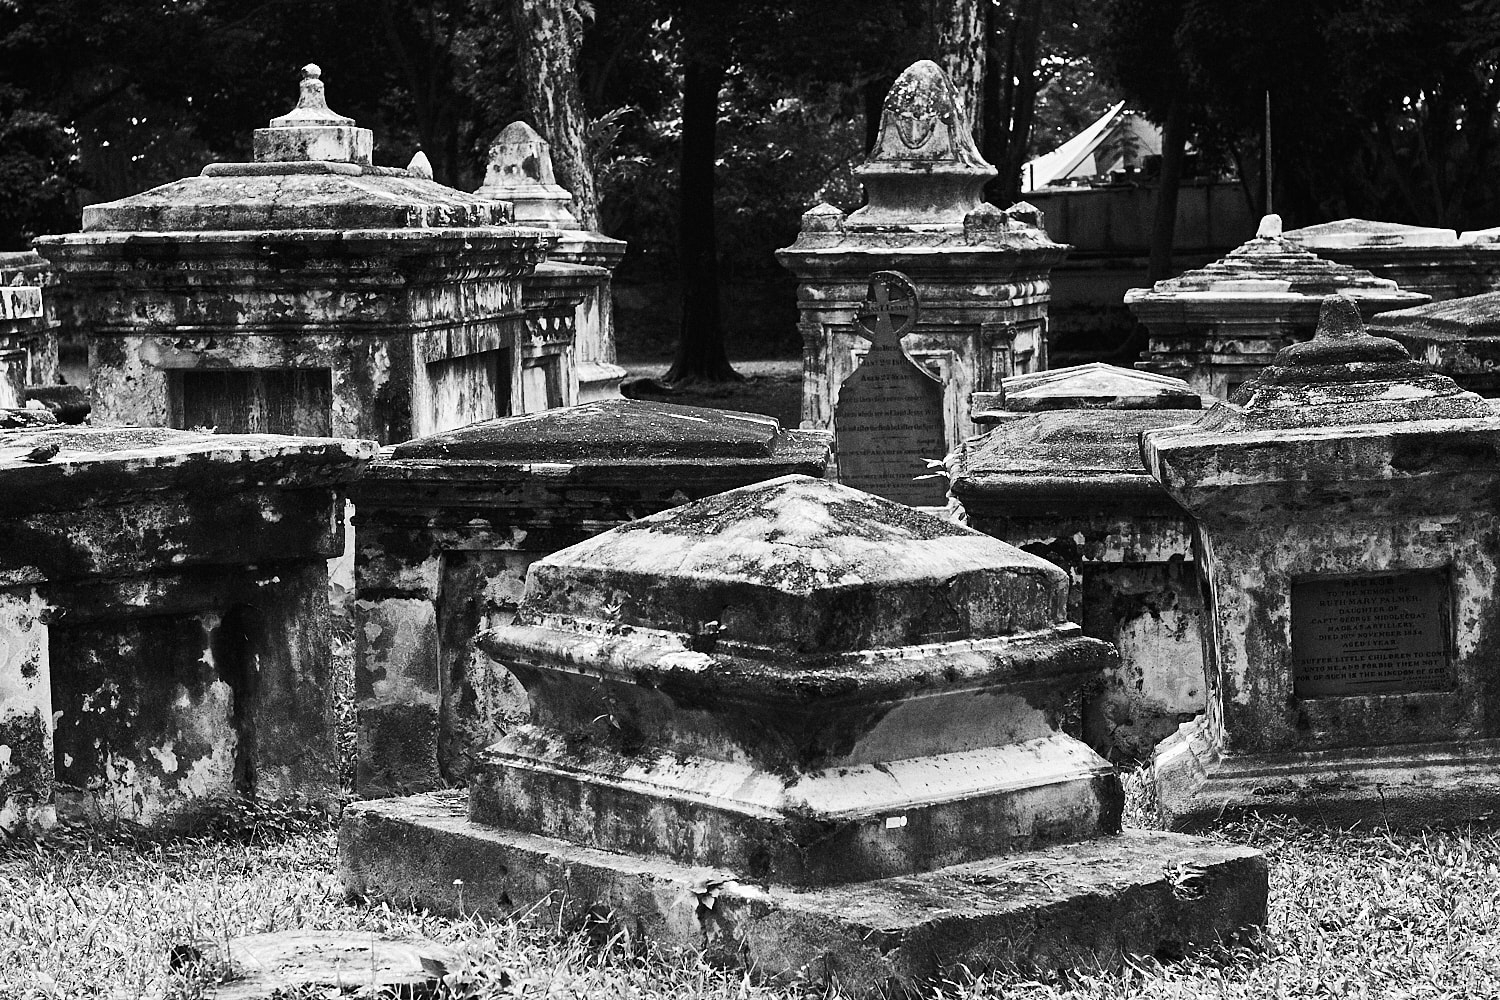 Northam Road Cemetery, an old Protestant cemetery in George Town, Malaysia